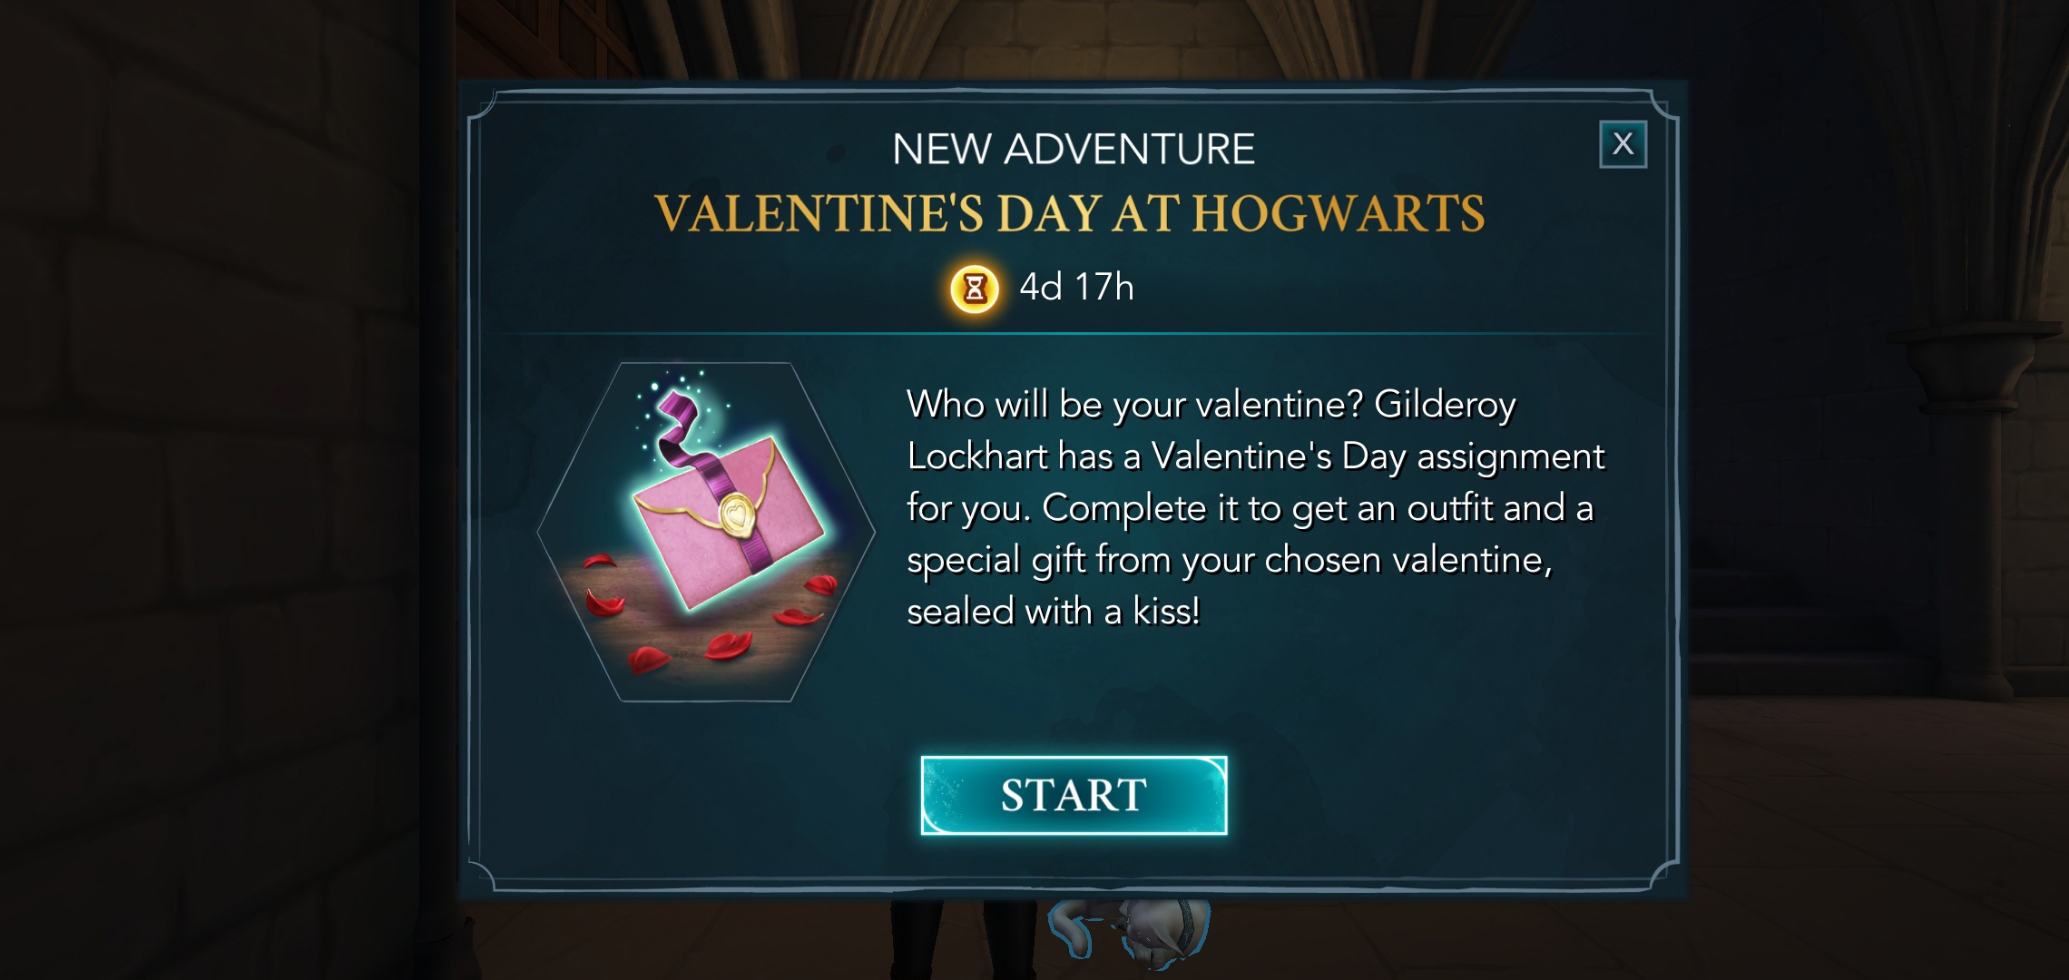 The Valentine's Day at Hogwarts side quest is underway in "Harry Potter: Hogwarts Mystery".